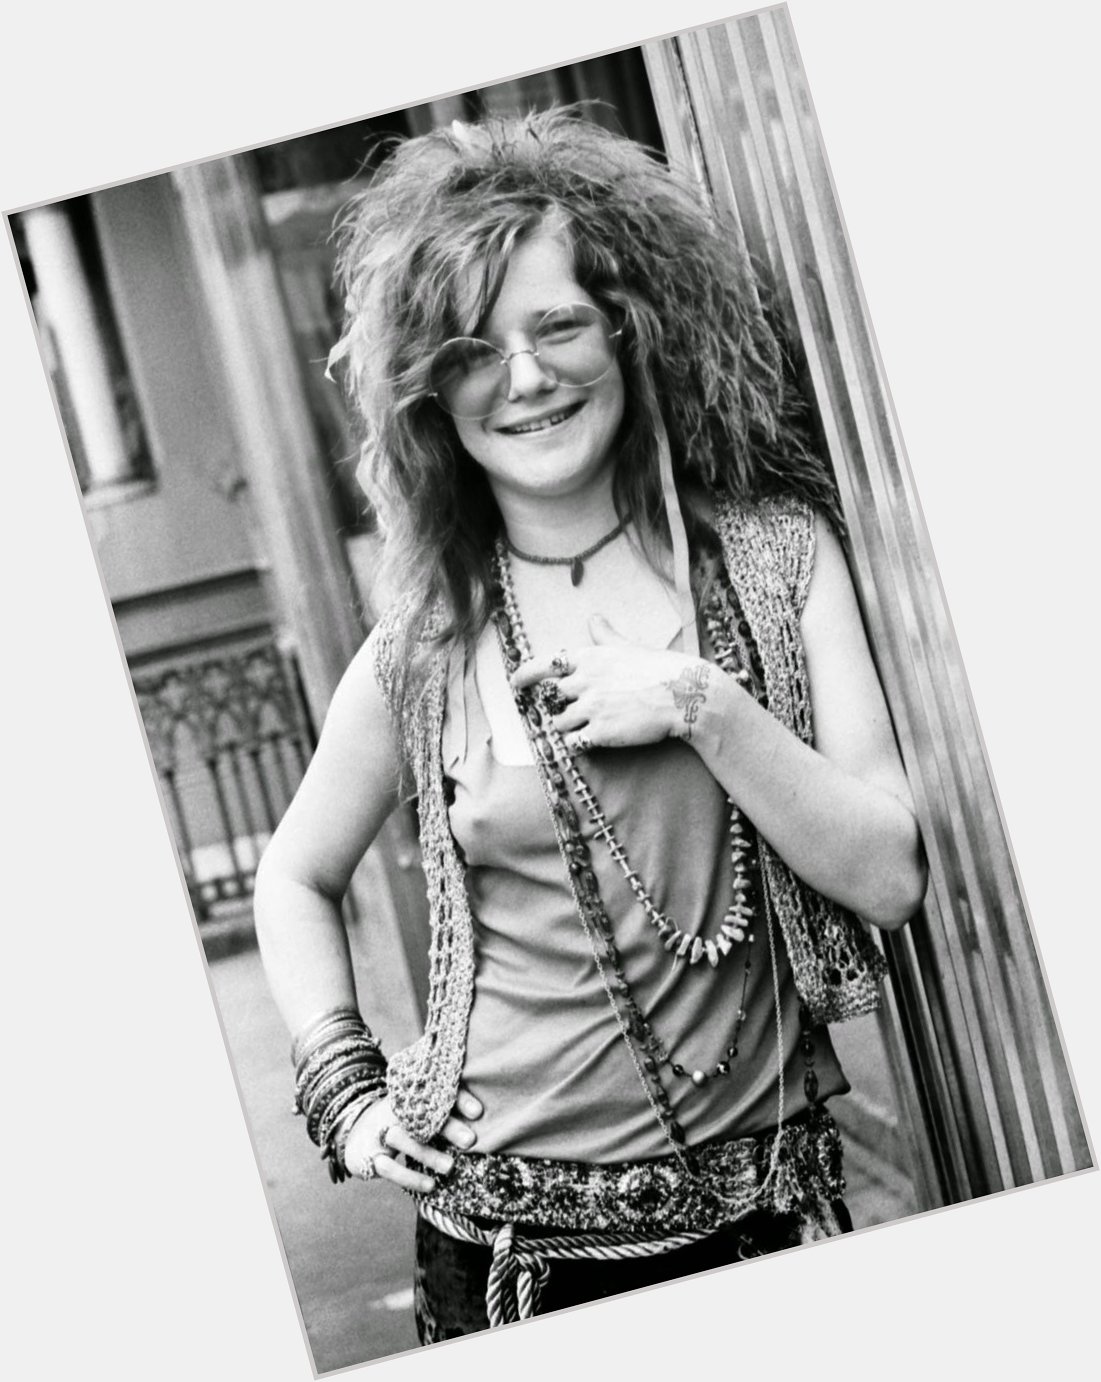 Happy Birthday In Heaven To Janis Joplin. She would have been 75 Today. 